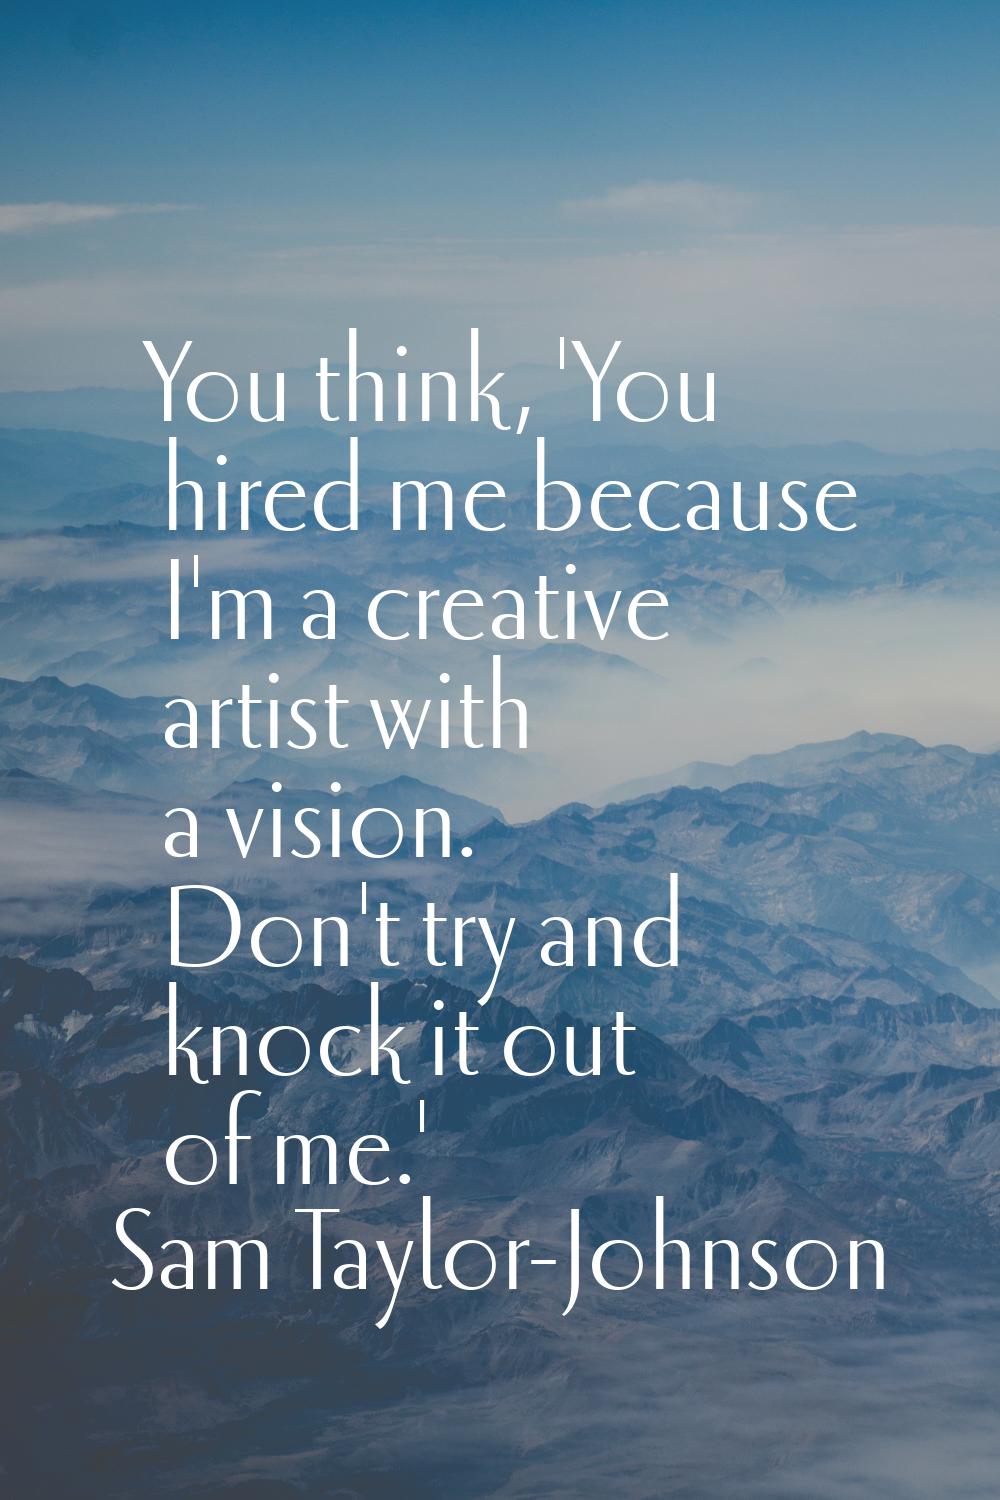 You think, 'You hired me because I'm a creative artist with a vision. Don't try and knock it out of